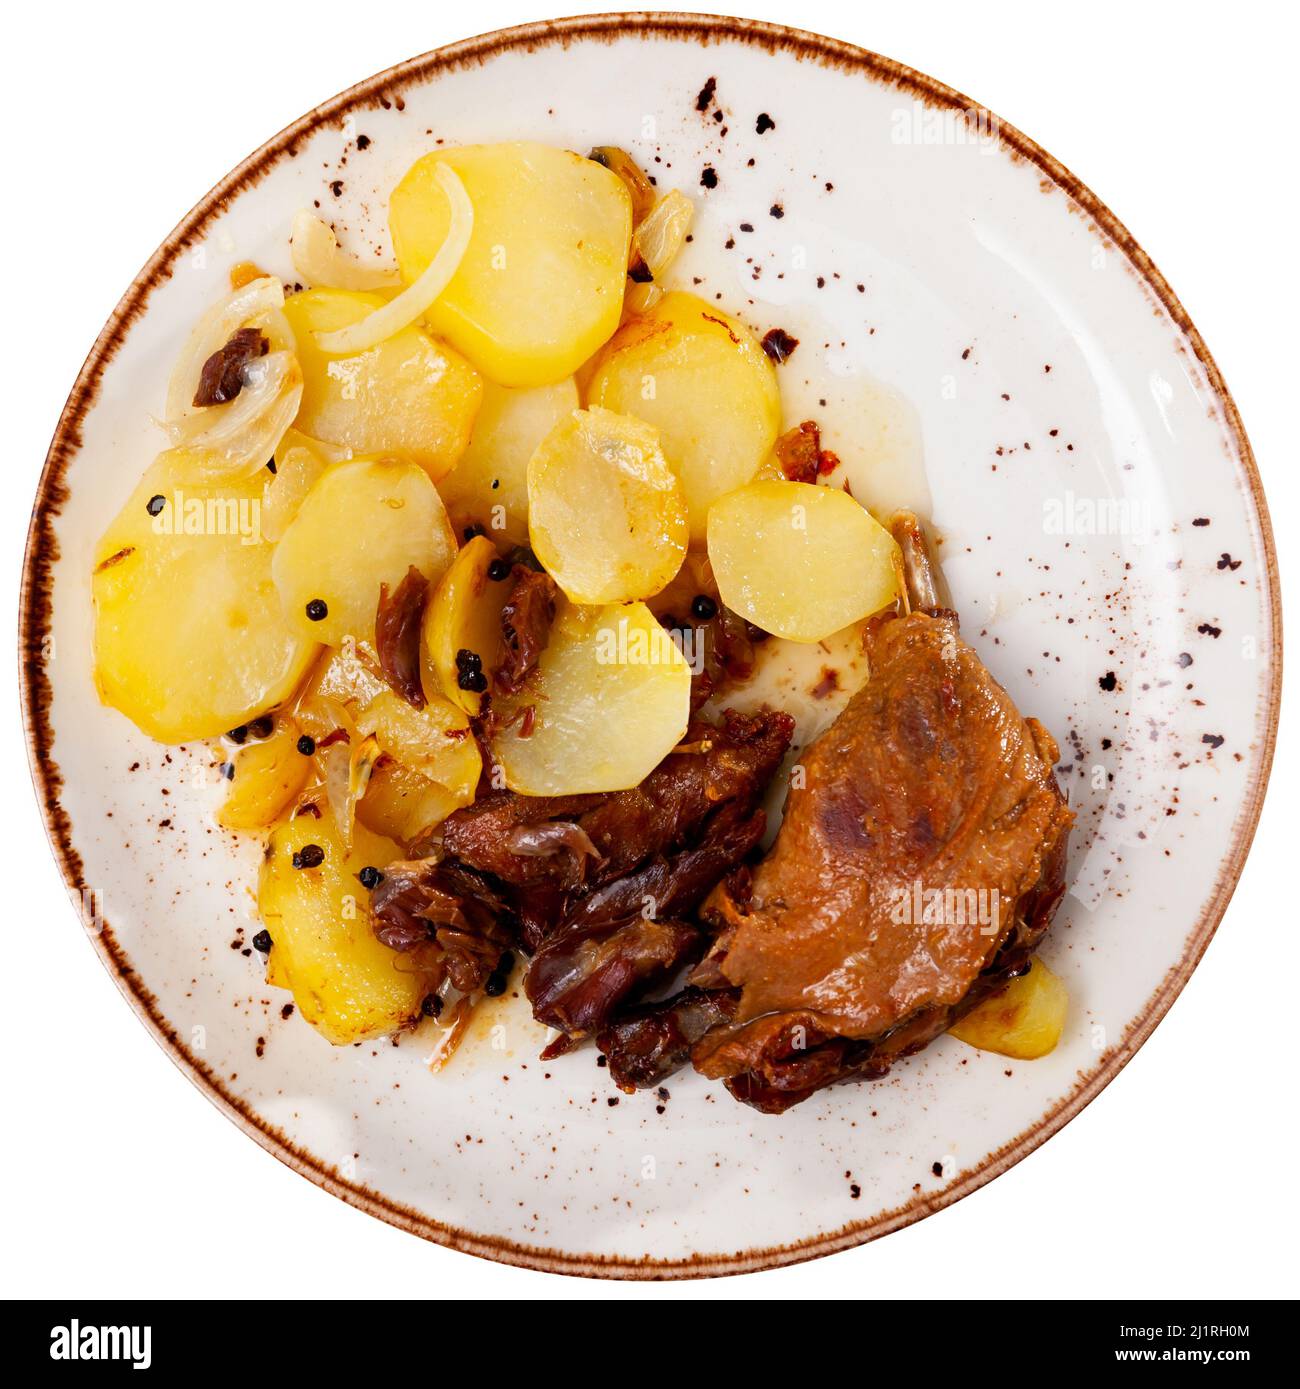 Portion of duck confit on table Stock Photo